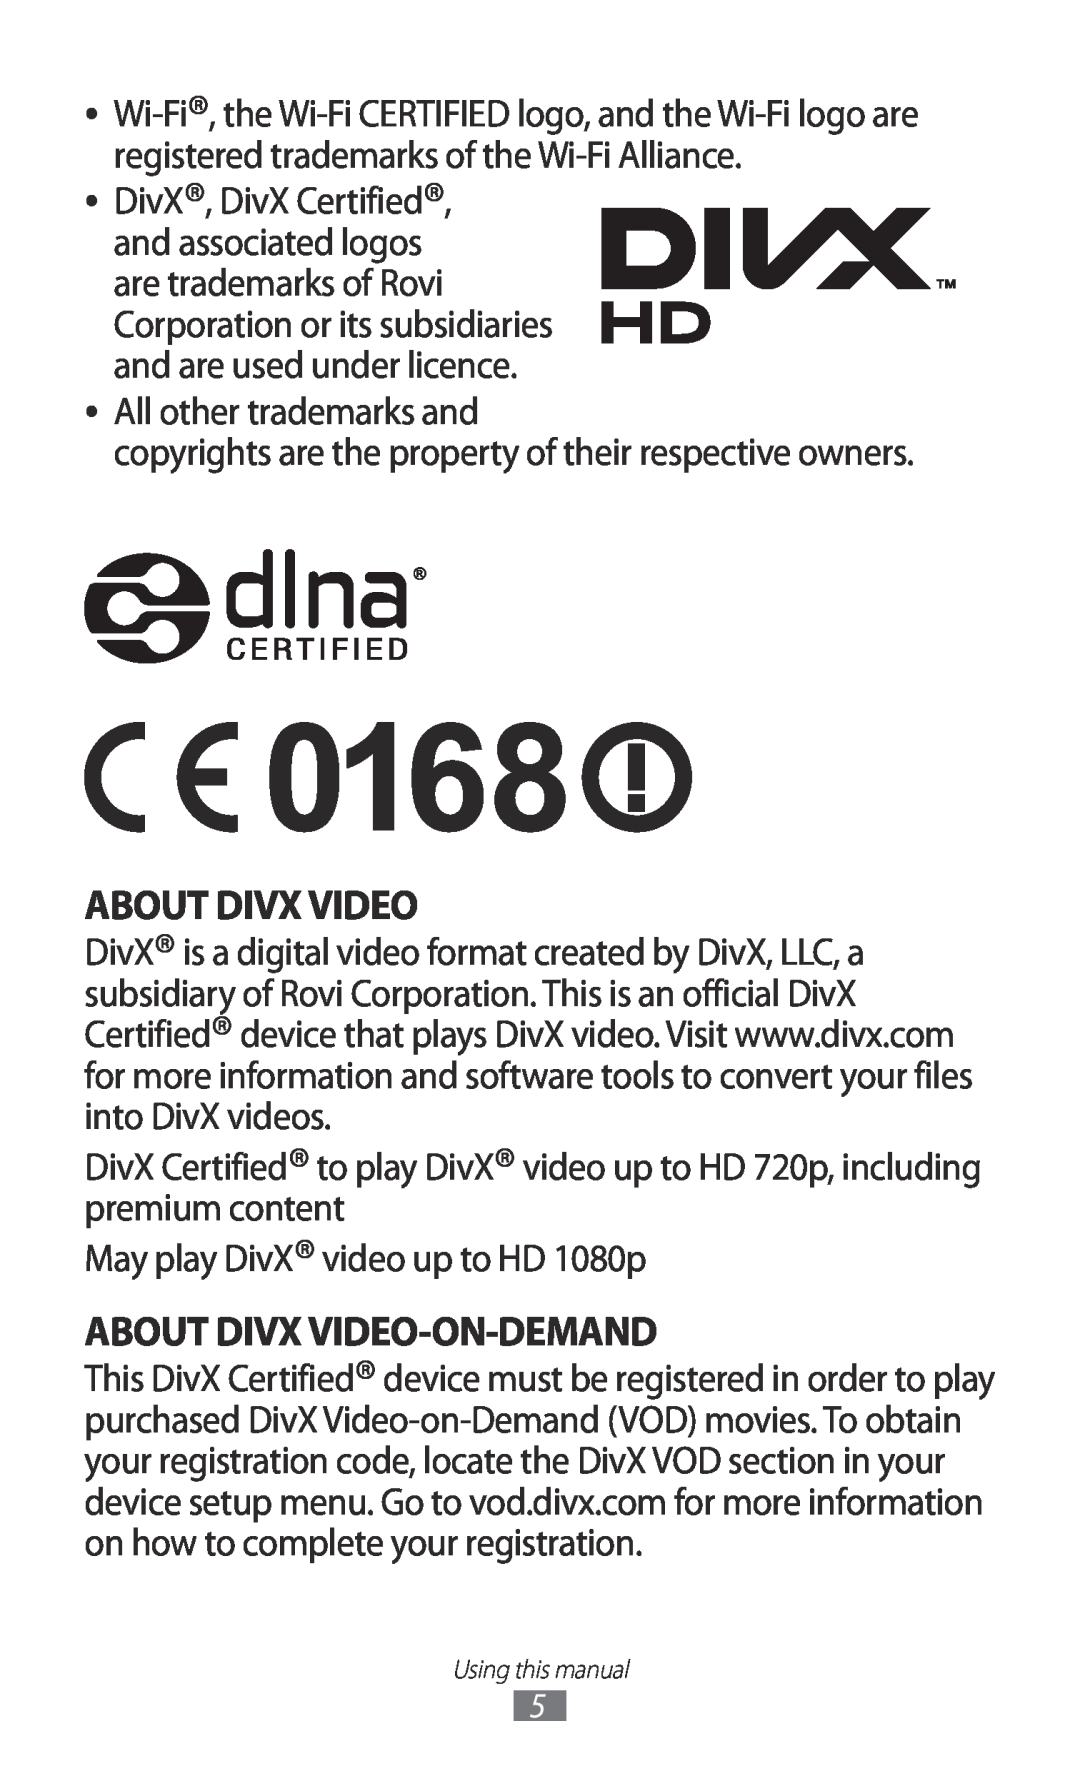 Samsung GT-P7310UWAITV manual About Divx Video-On-Demand, All other trademarks and, May play DivX video up to HD 1080p 